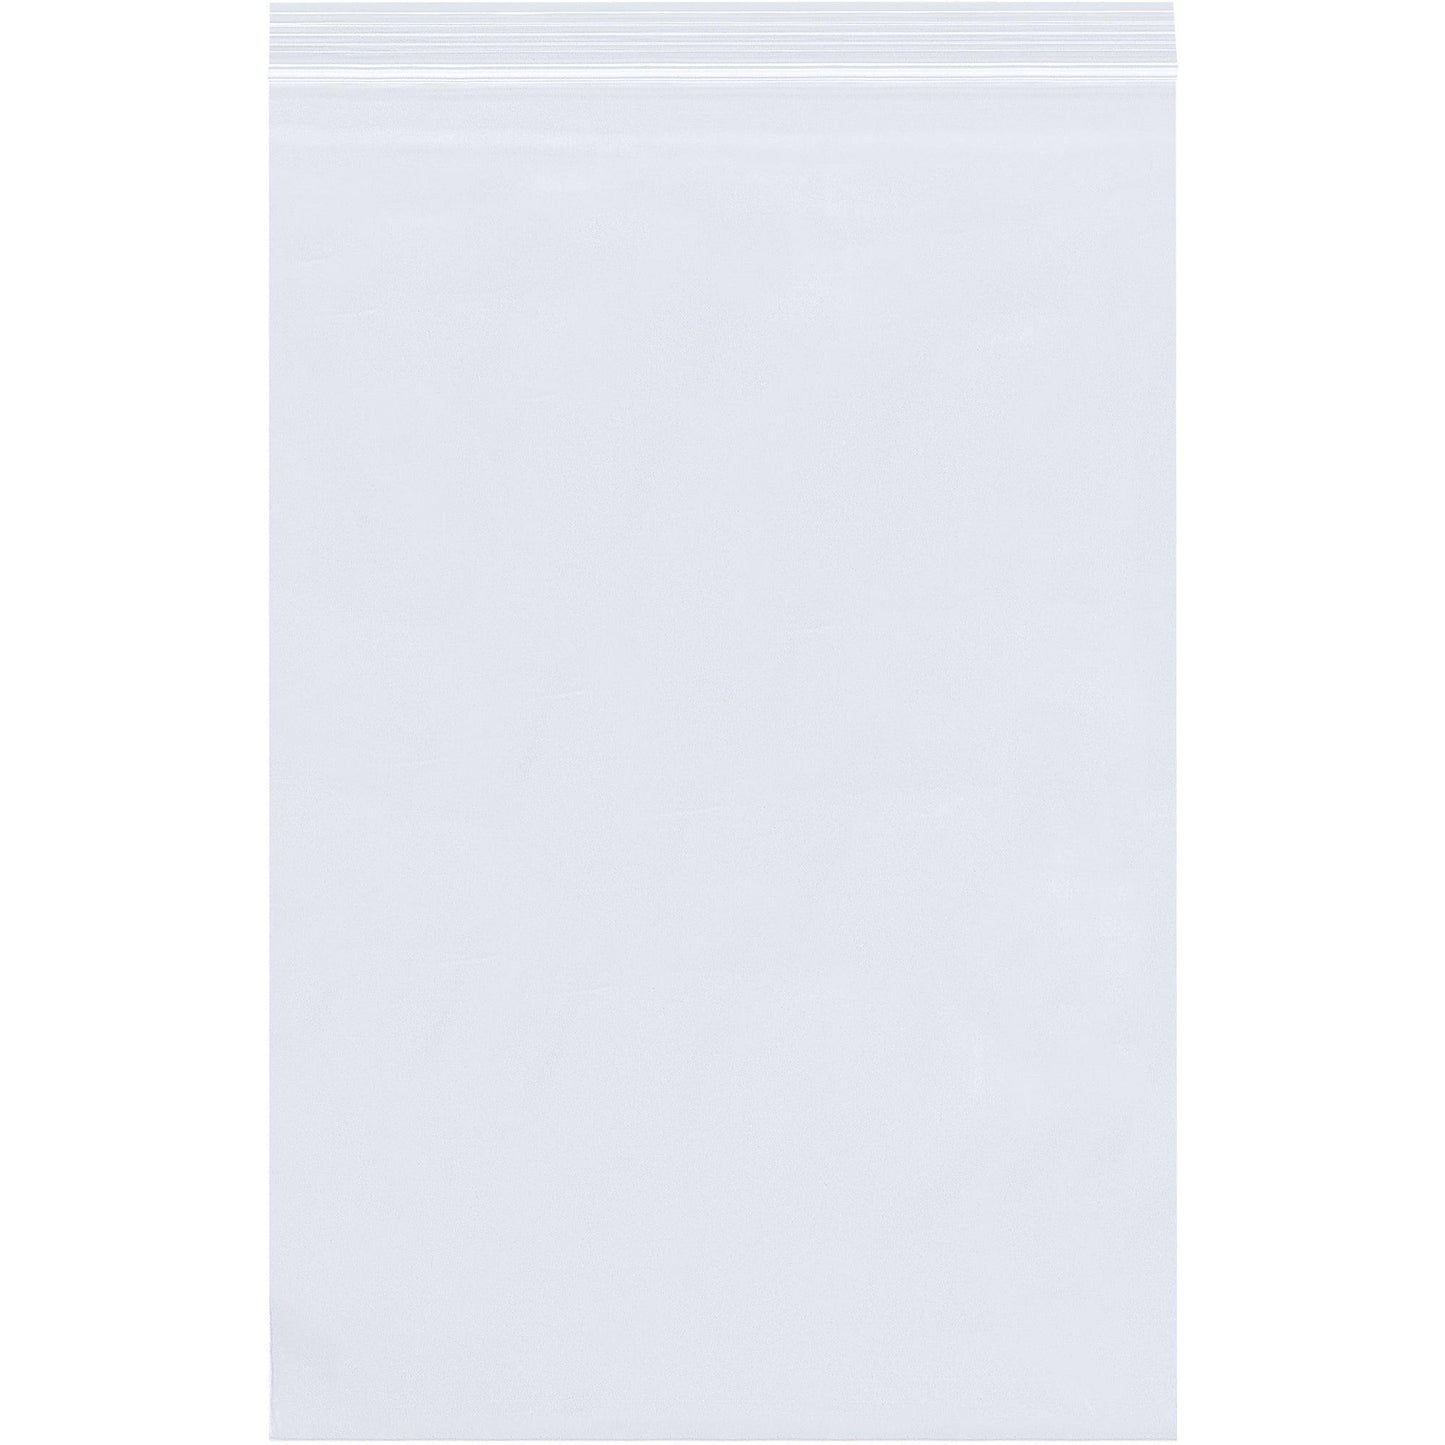 12 x 14" - 2 Mil Reclosable Poly Bags - PB3667